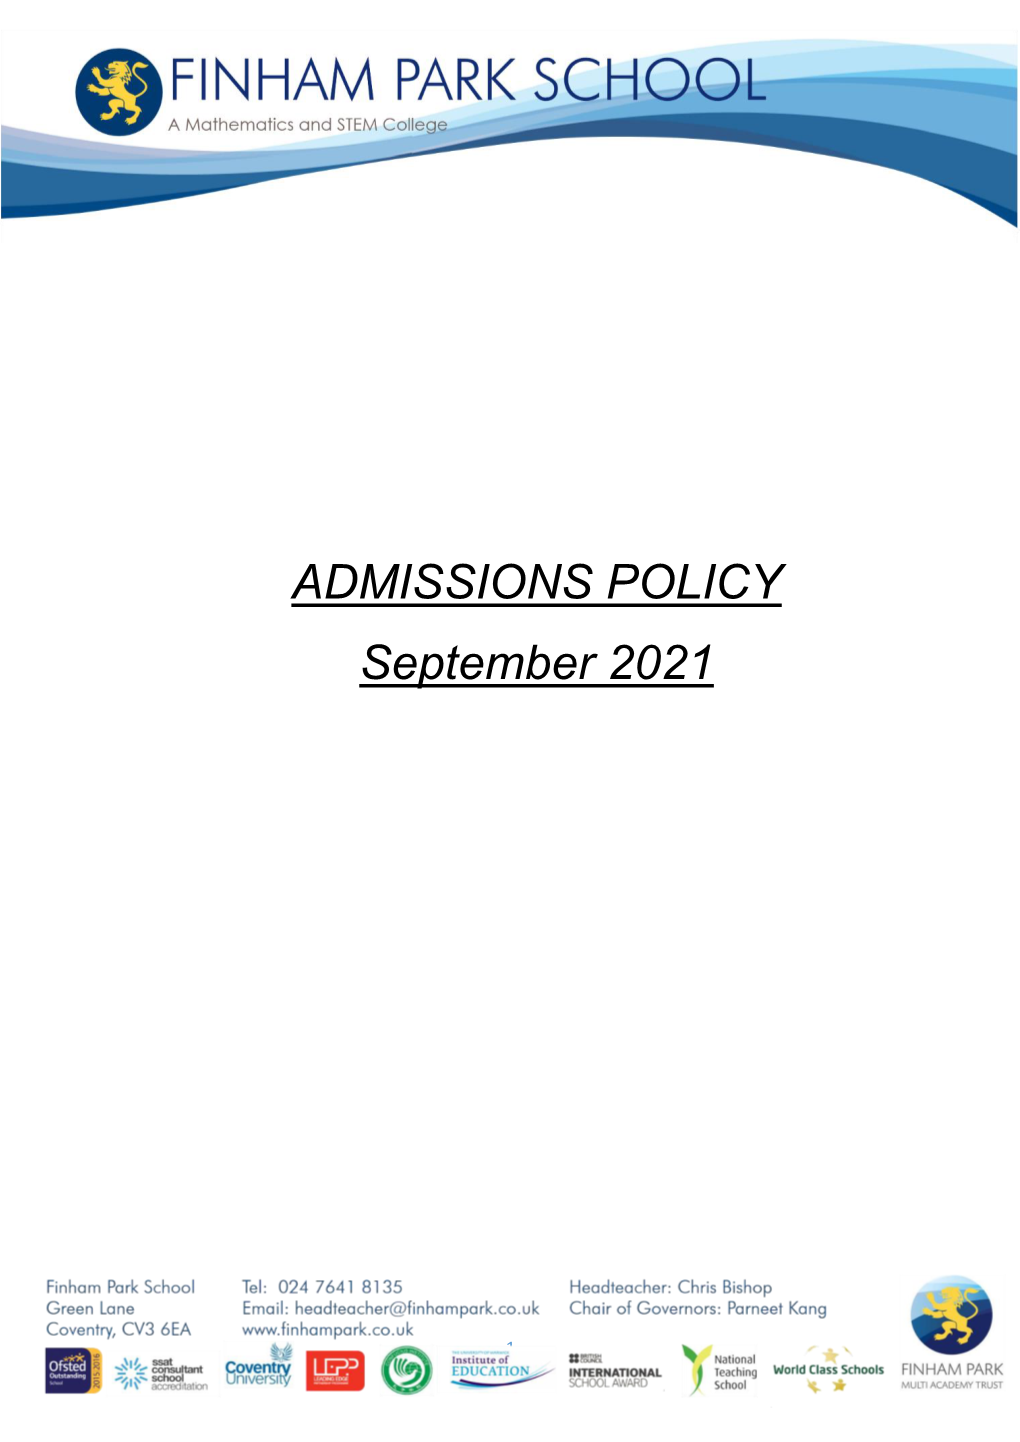 ADMISSIONS POLICY September 2021